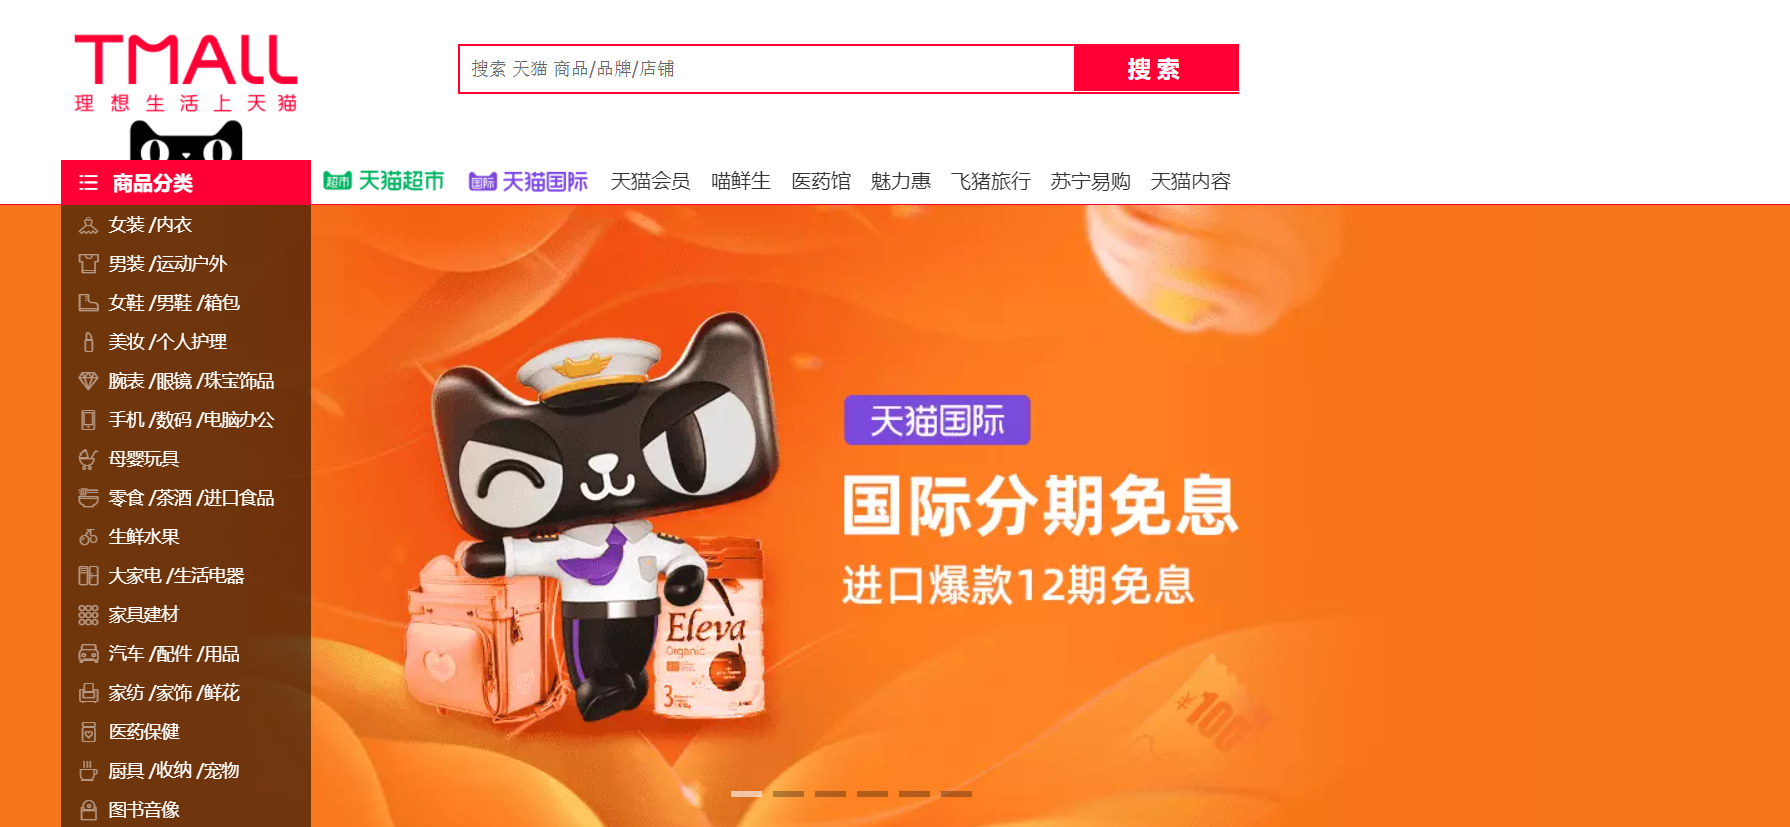 The main store page for Chinese eCommerce marketplace Tmall.